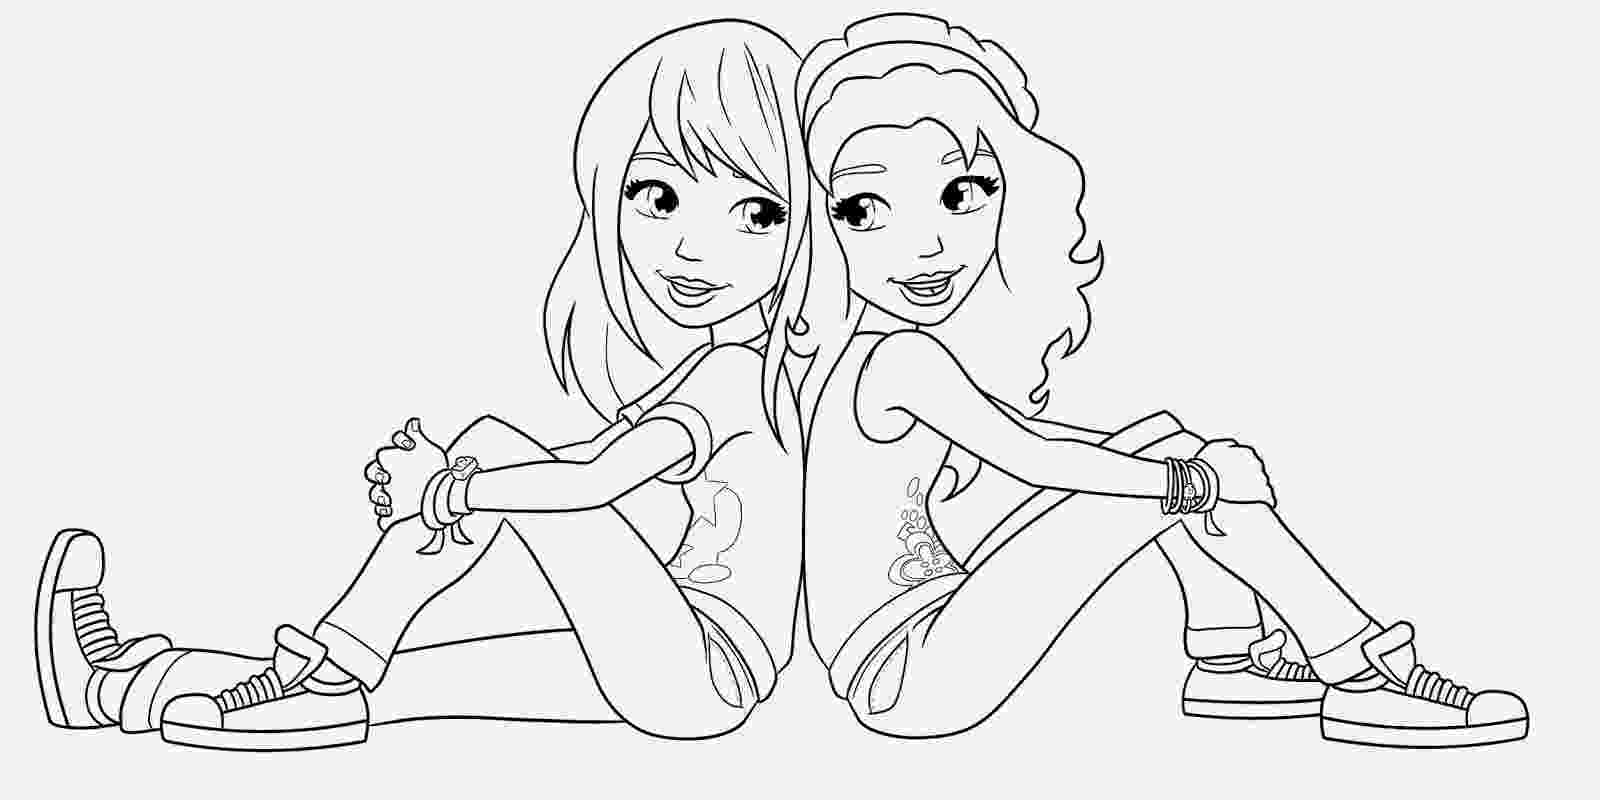 coloring lego friends lego friends coloring pages coloring pages to download friends lego coloring 1 1